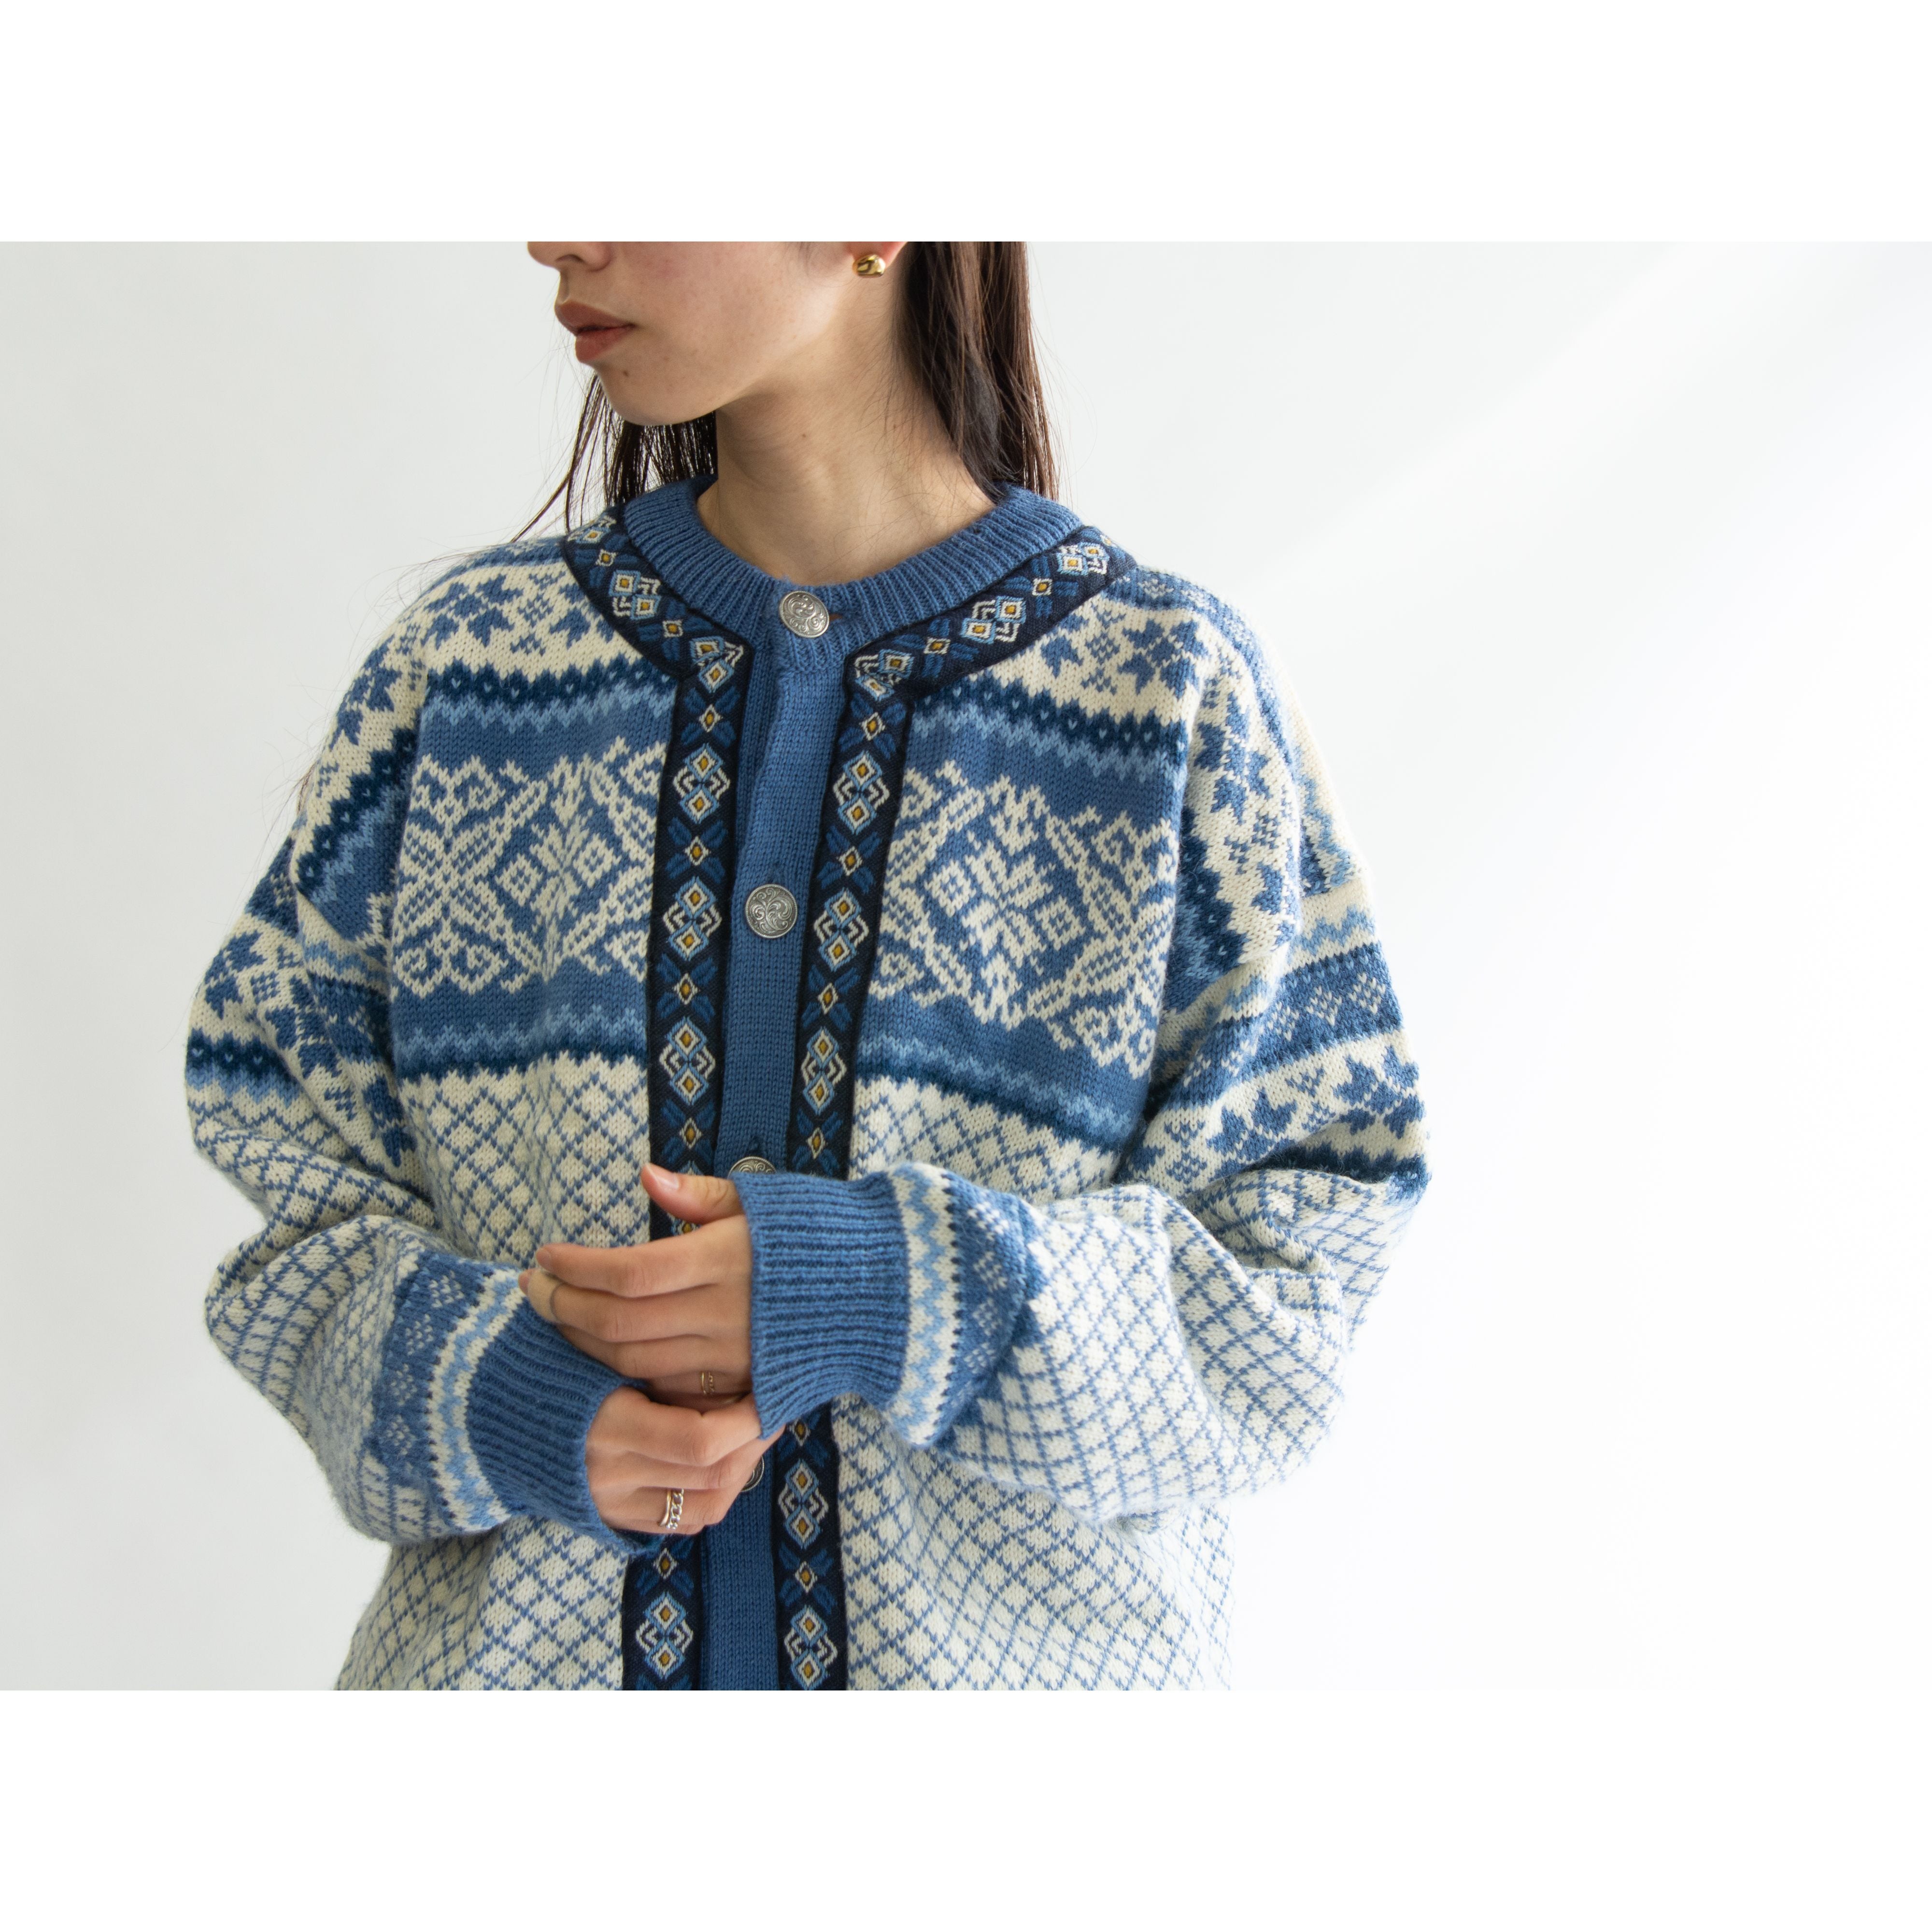 【FJORD】Made in Norway Nordic knit wool cardigan sweater ...